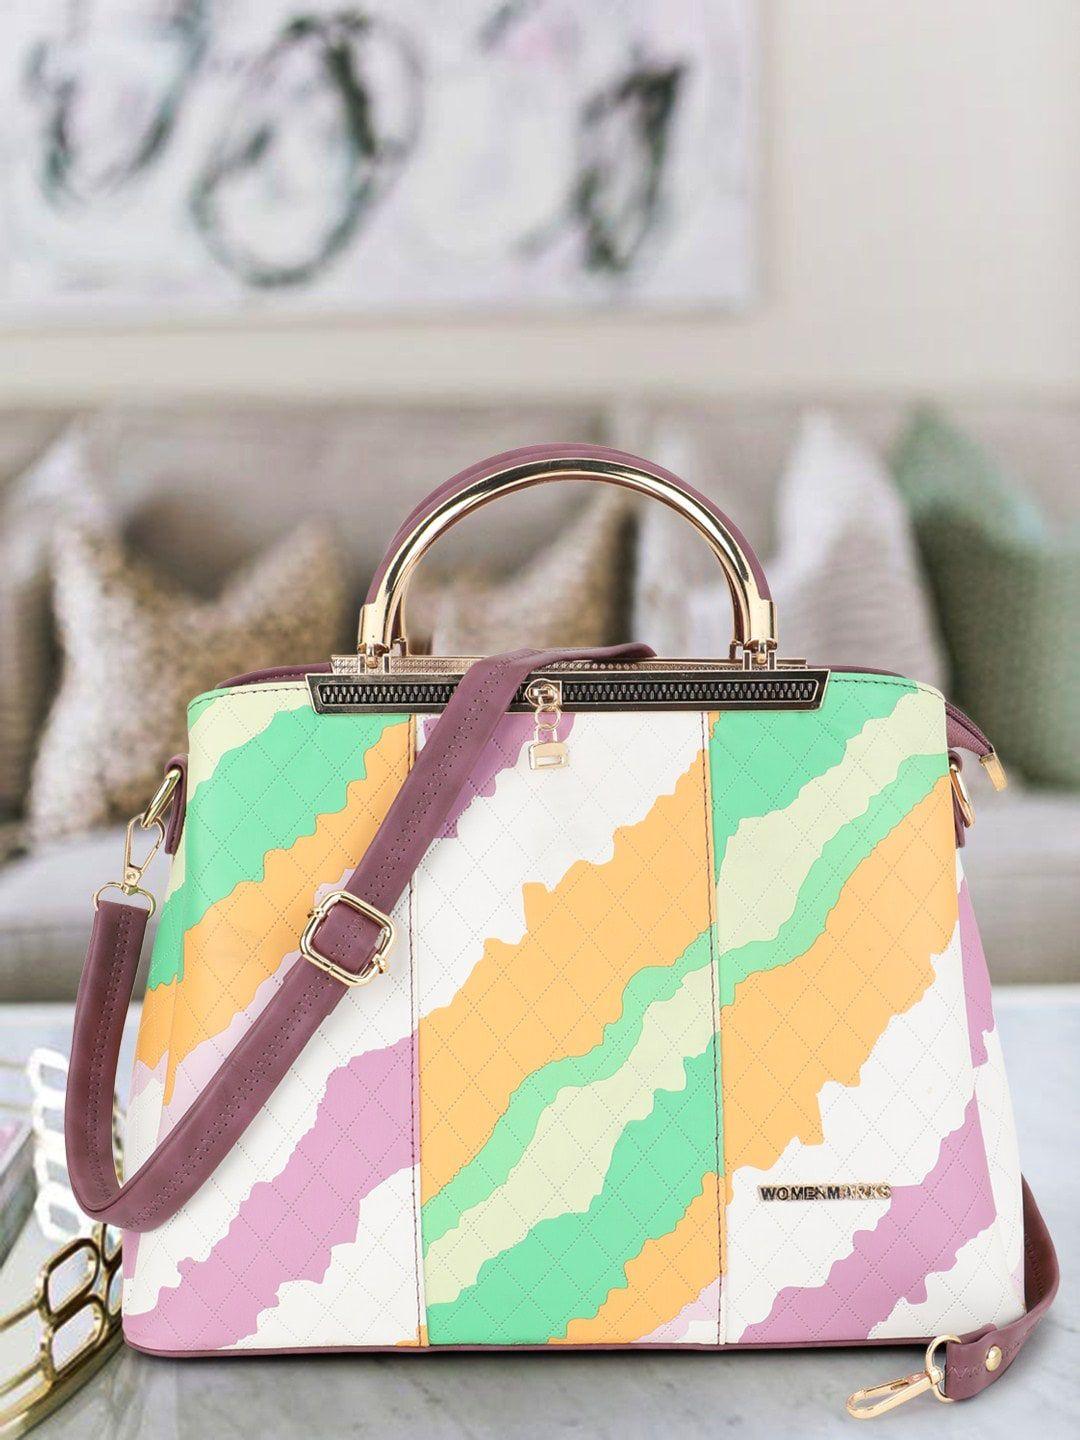 women marks multicoloured printed pu oversized structured handheld bag with bow detail